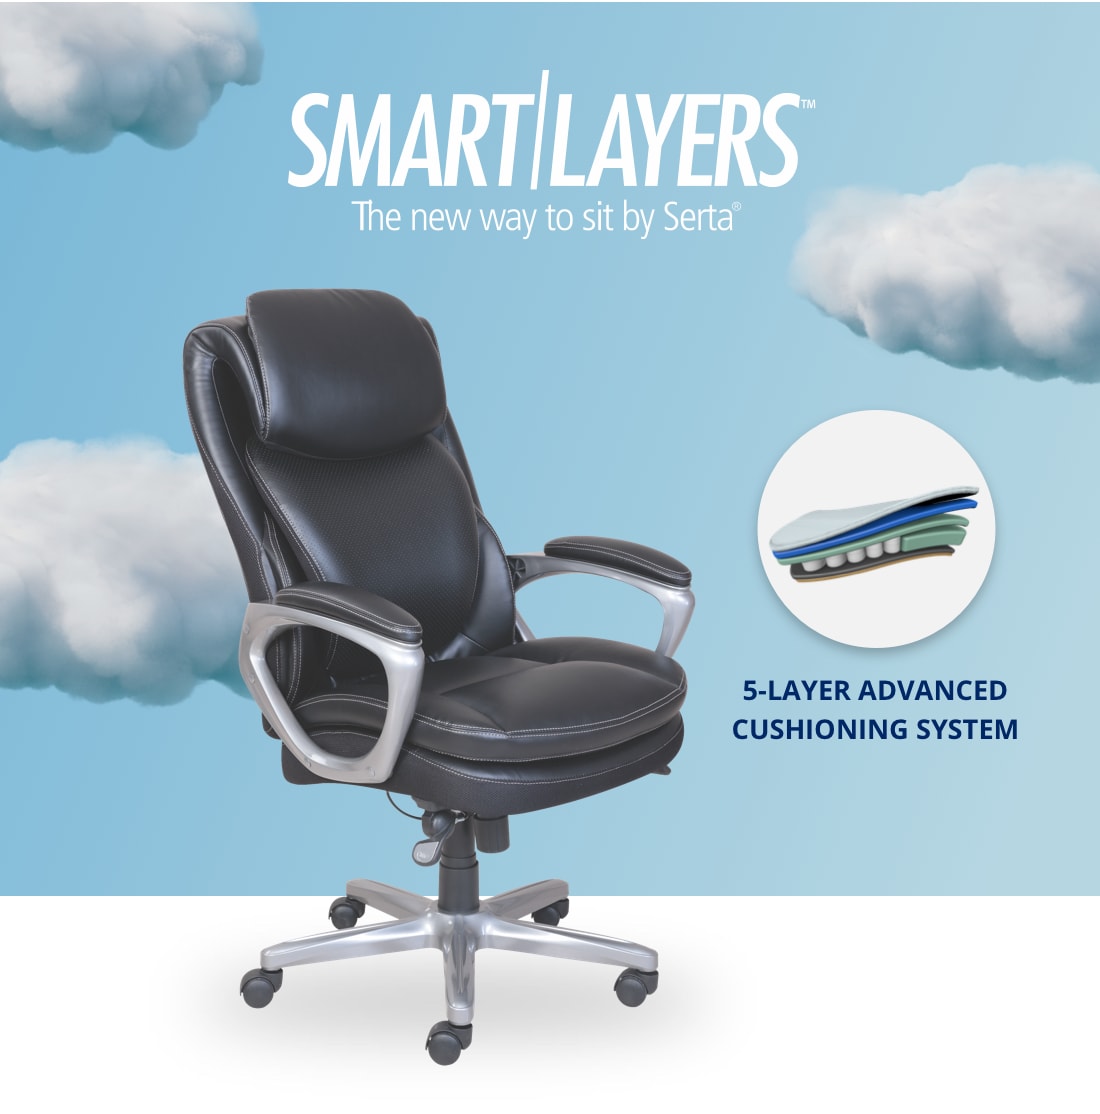 Smartlayers- The new way to sit by Serta